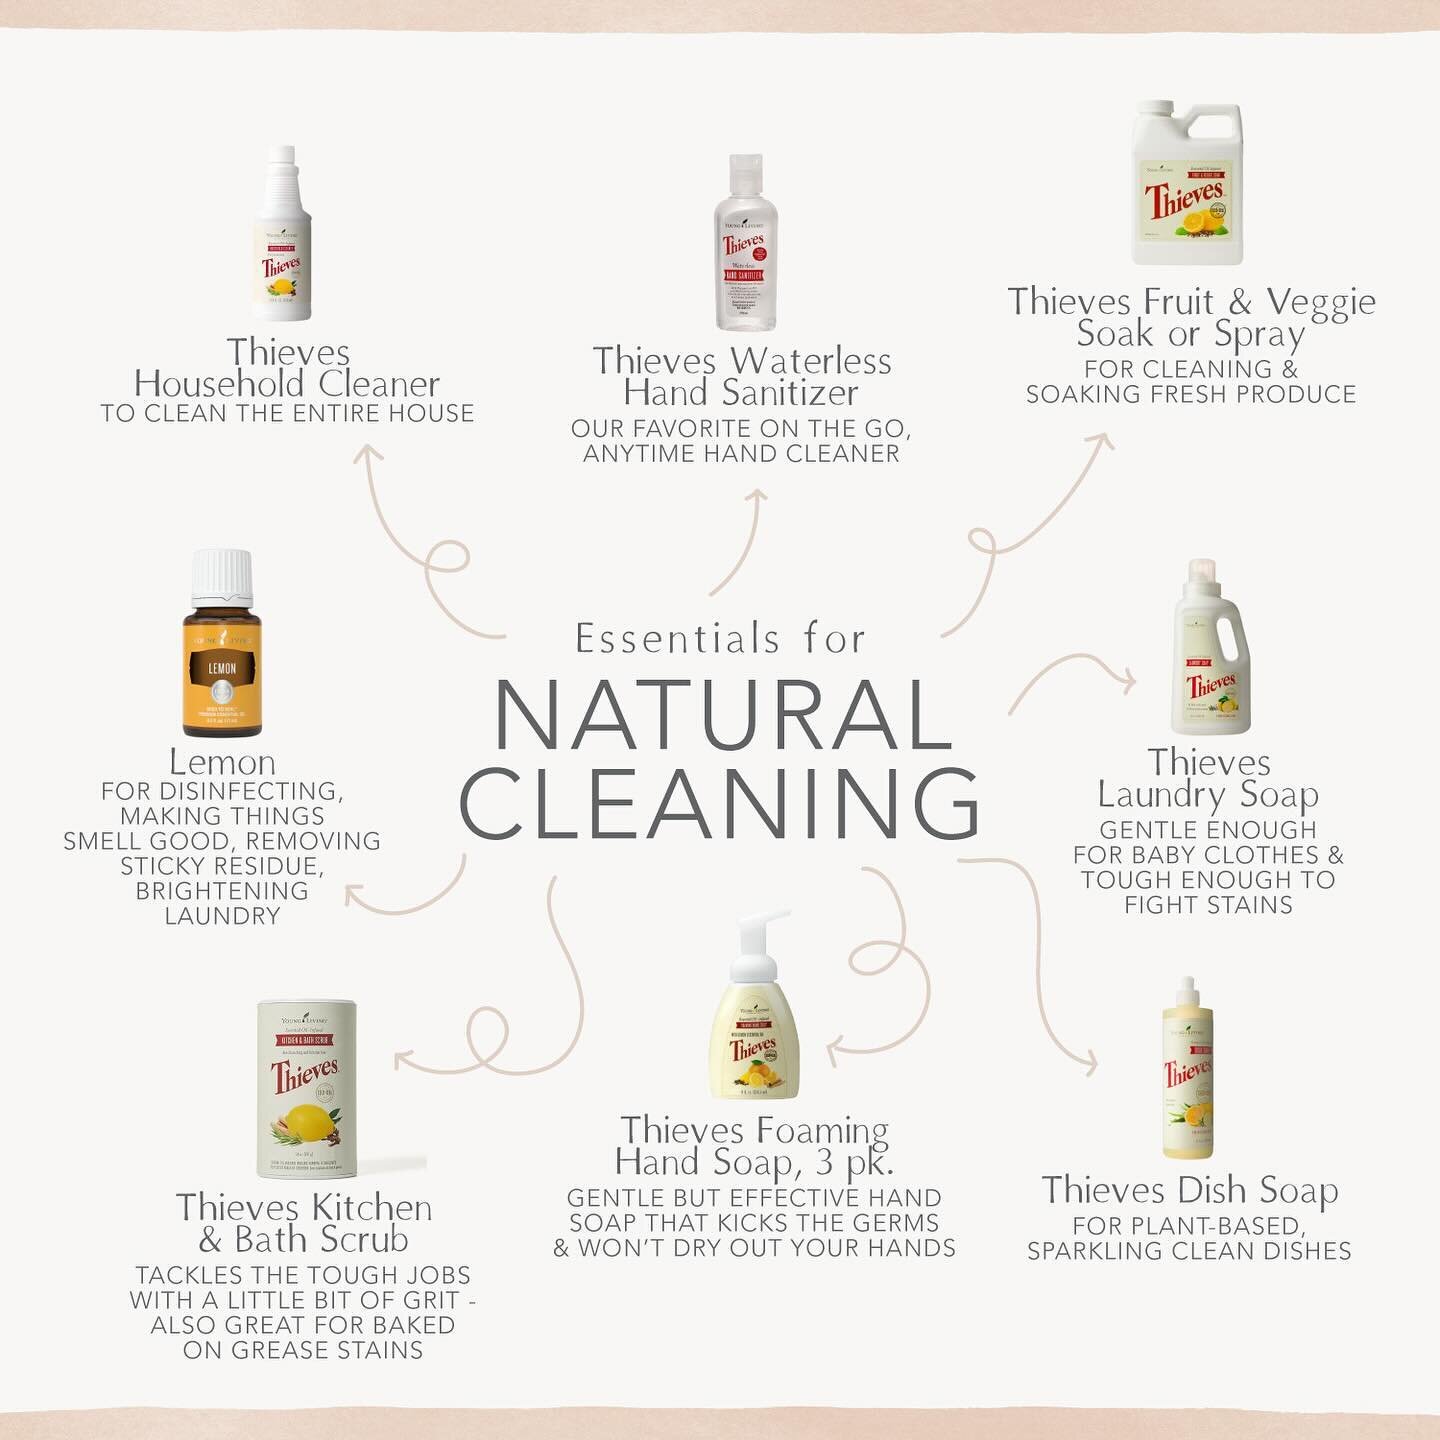 Our [clean] cleaning must haves:

Thieves Household Cleaner
Formulated with the power of Young Living&rsquo;s Thieves essential oil blend, Thieves Household Cleaner is a concentrated, versatile solution that gives you a deep clean when scrubbing, deg